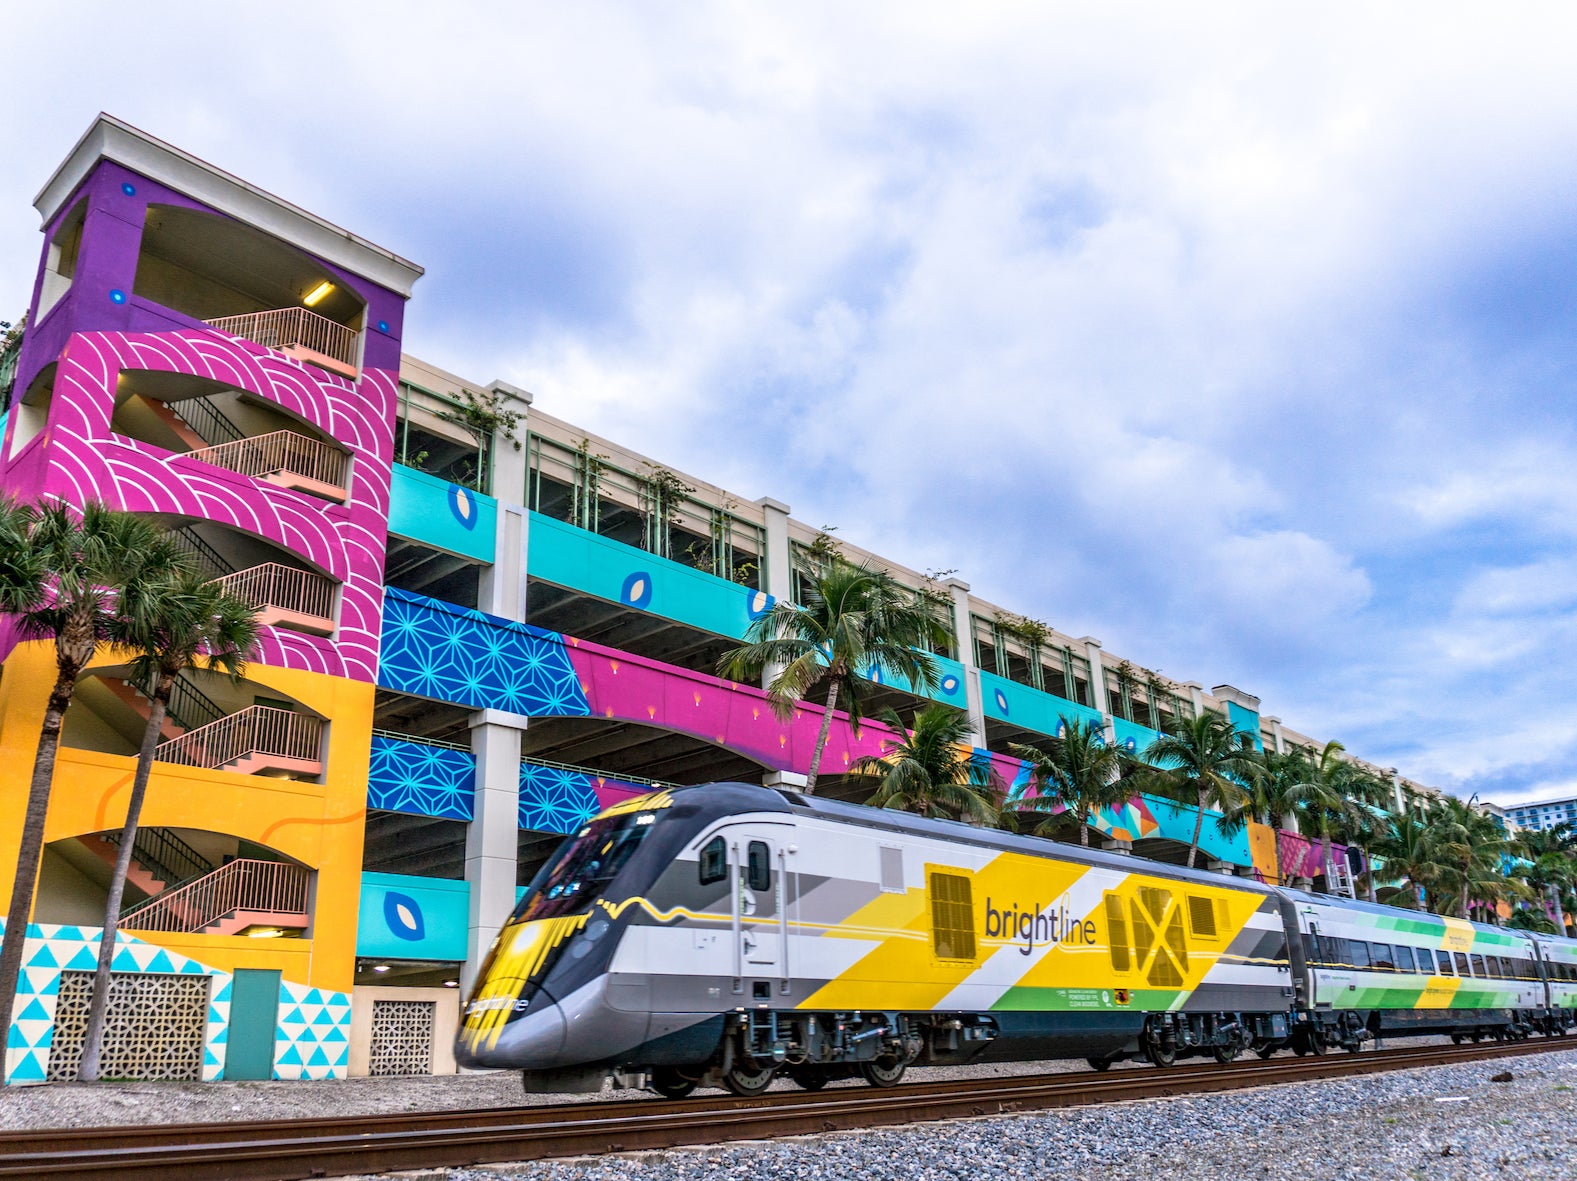 The Brightline passes through West Palm Beach on its way from Miami to Orlando